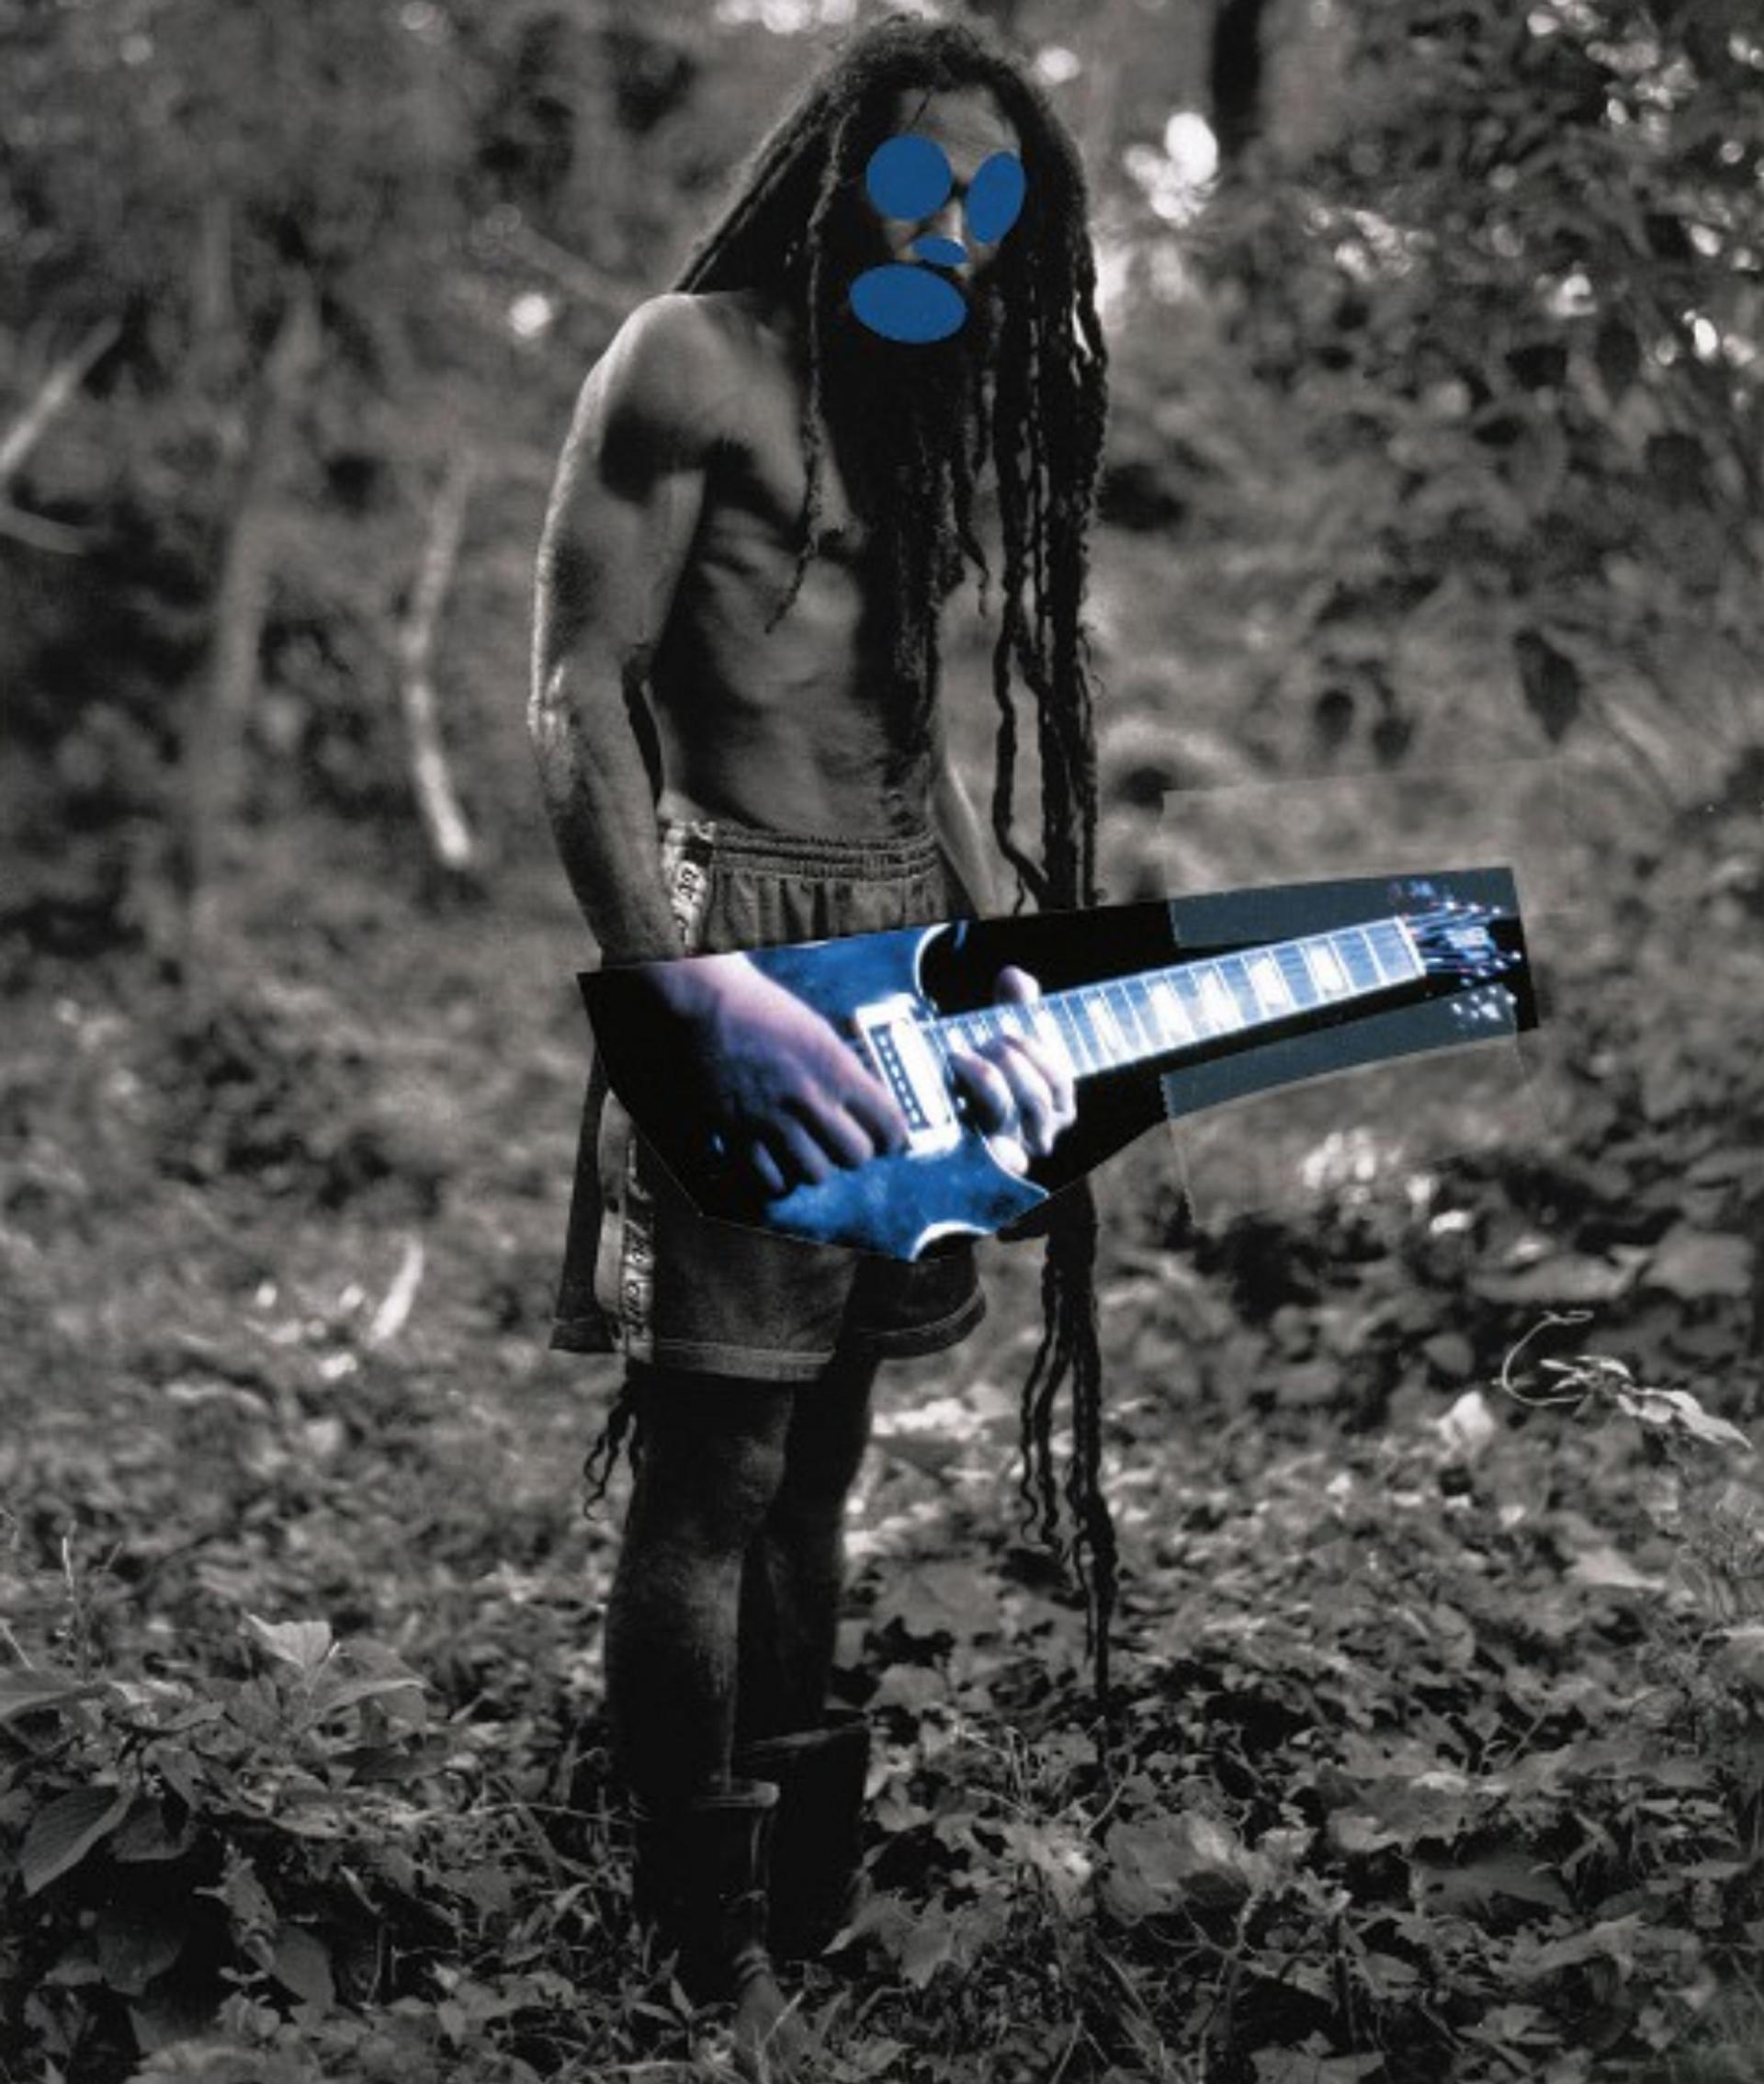 An image of Graduation by Richard Prince. It is a black-and-white picture of a Black man with long dreadlocks, standing in a wooded area. His face is obscured by blue dots, and the image of a guitar has been superimposed over his hands.